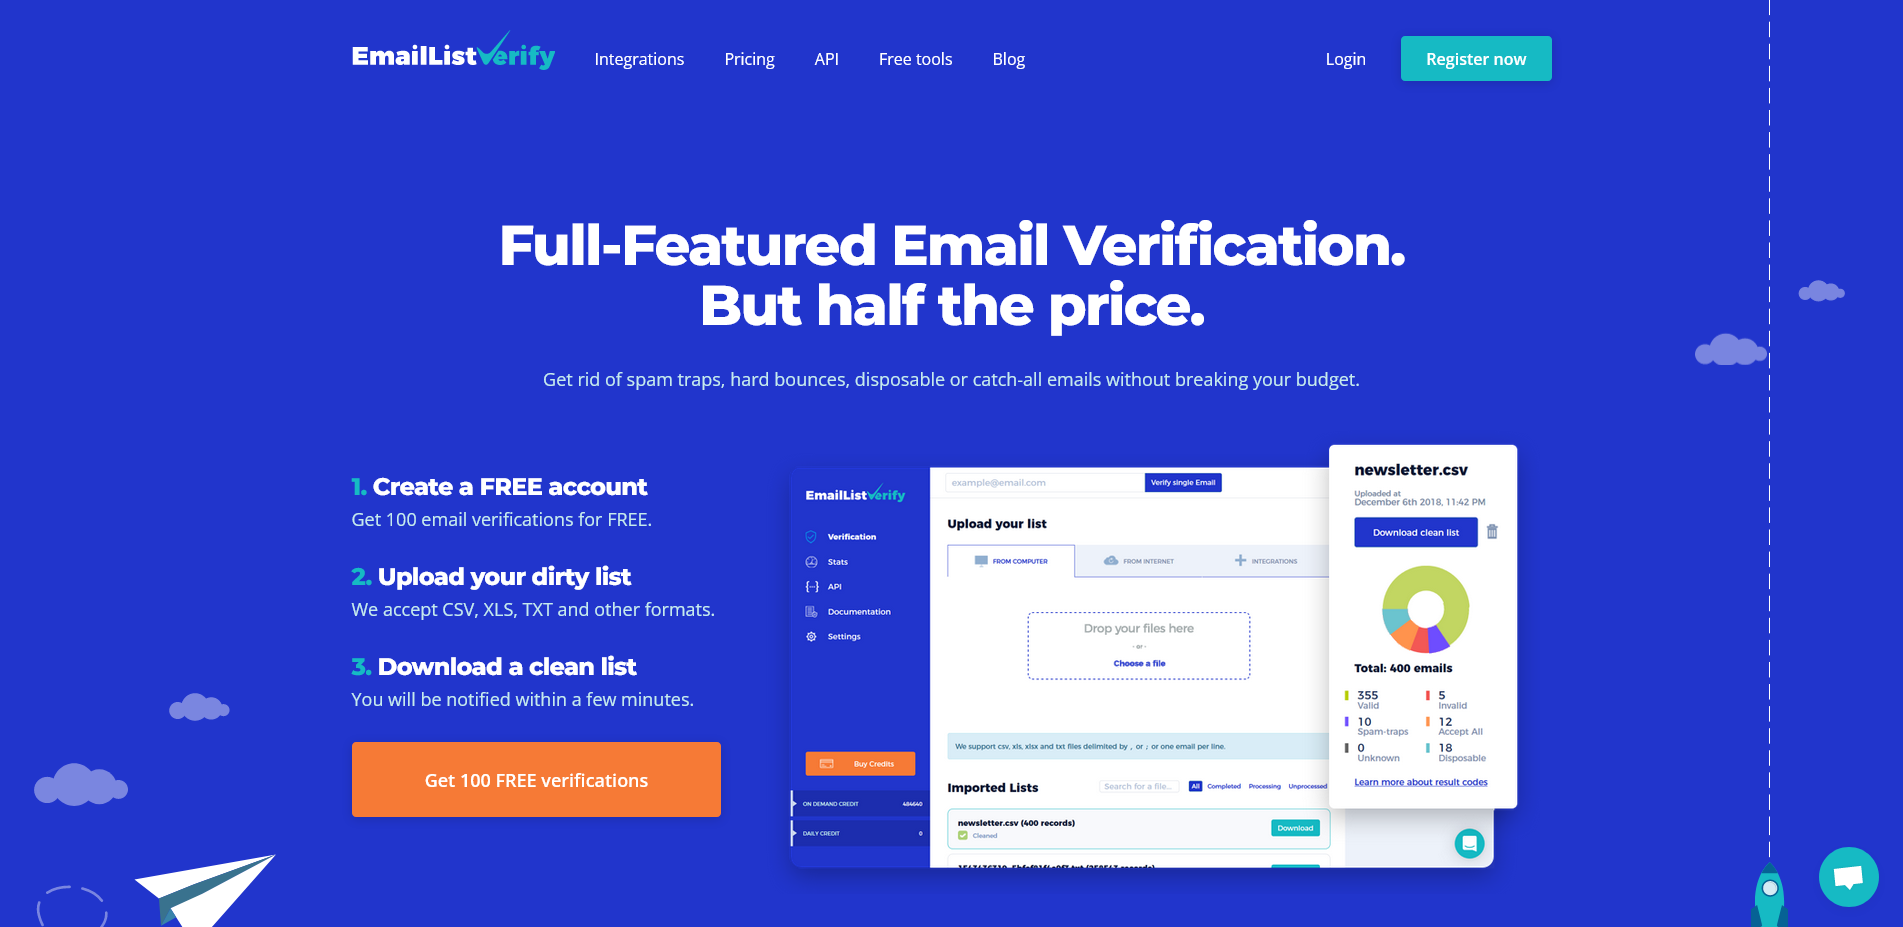 Email List Verify Email Verification Tool